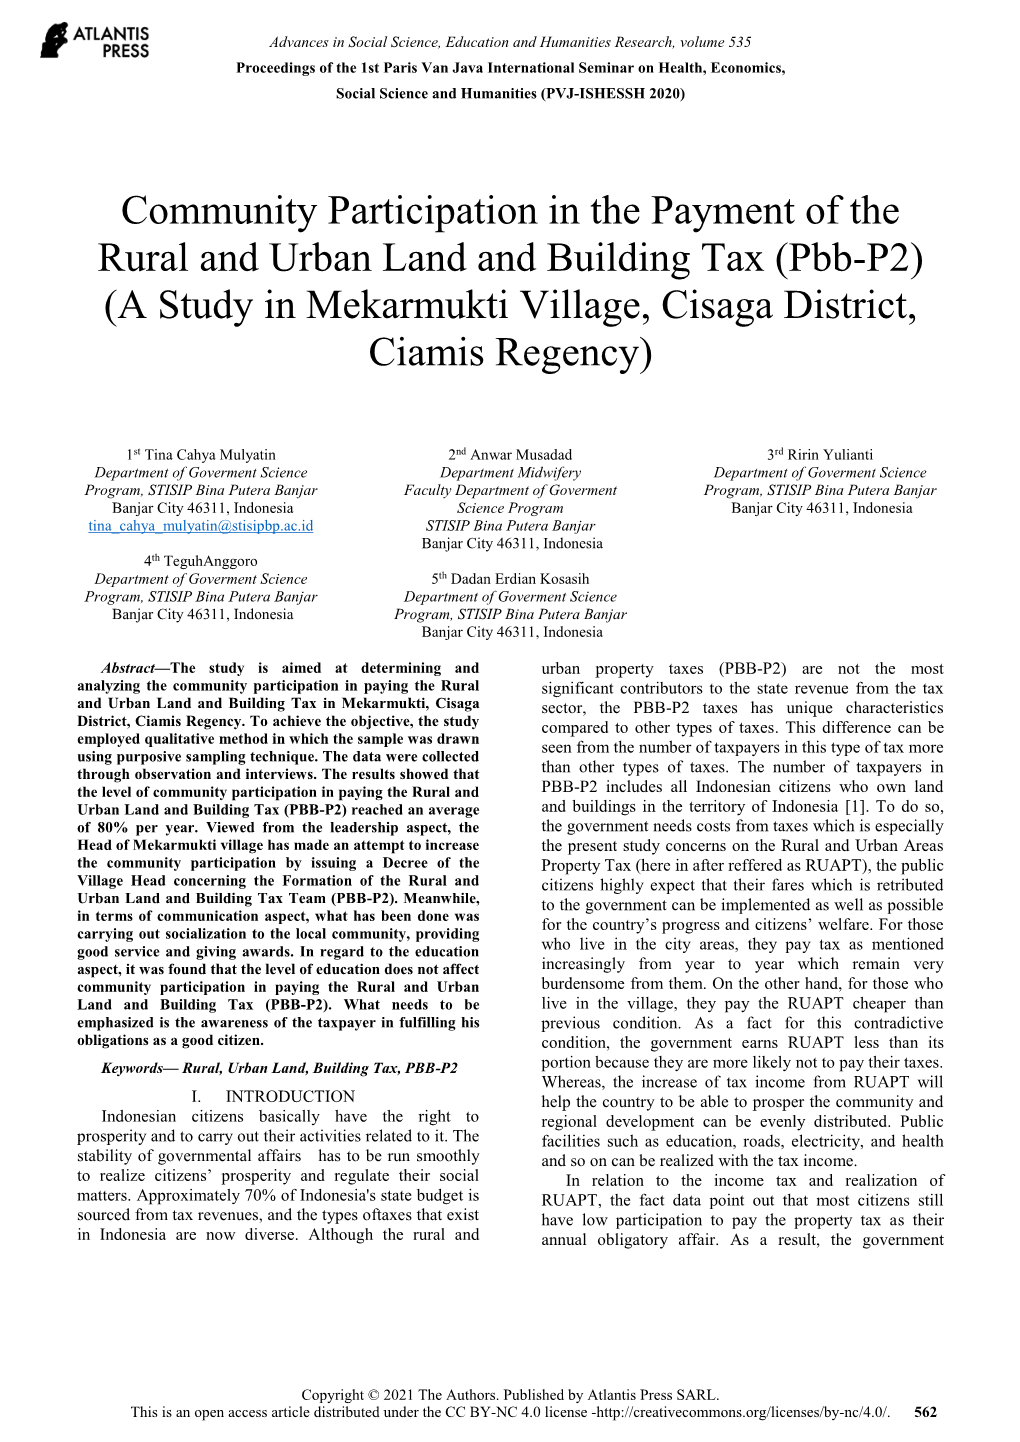 Community Participation in the Payment of the Rural and Urban Land and Building Tax (Pbb-P2) (A Study in Mekarmukti Village, Cisaga District, Ciamis Regency)